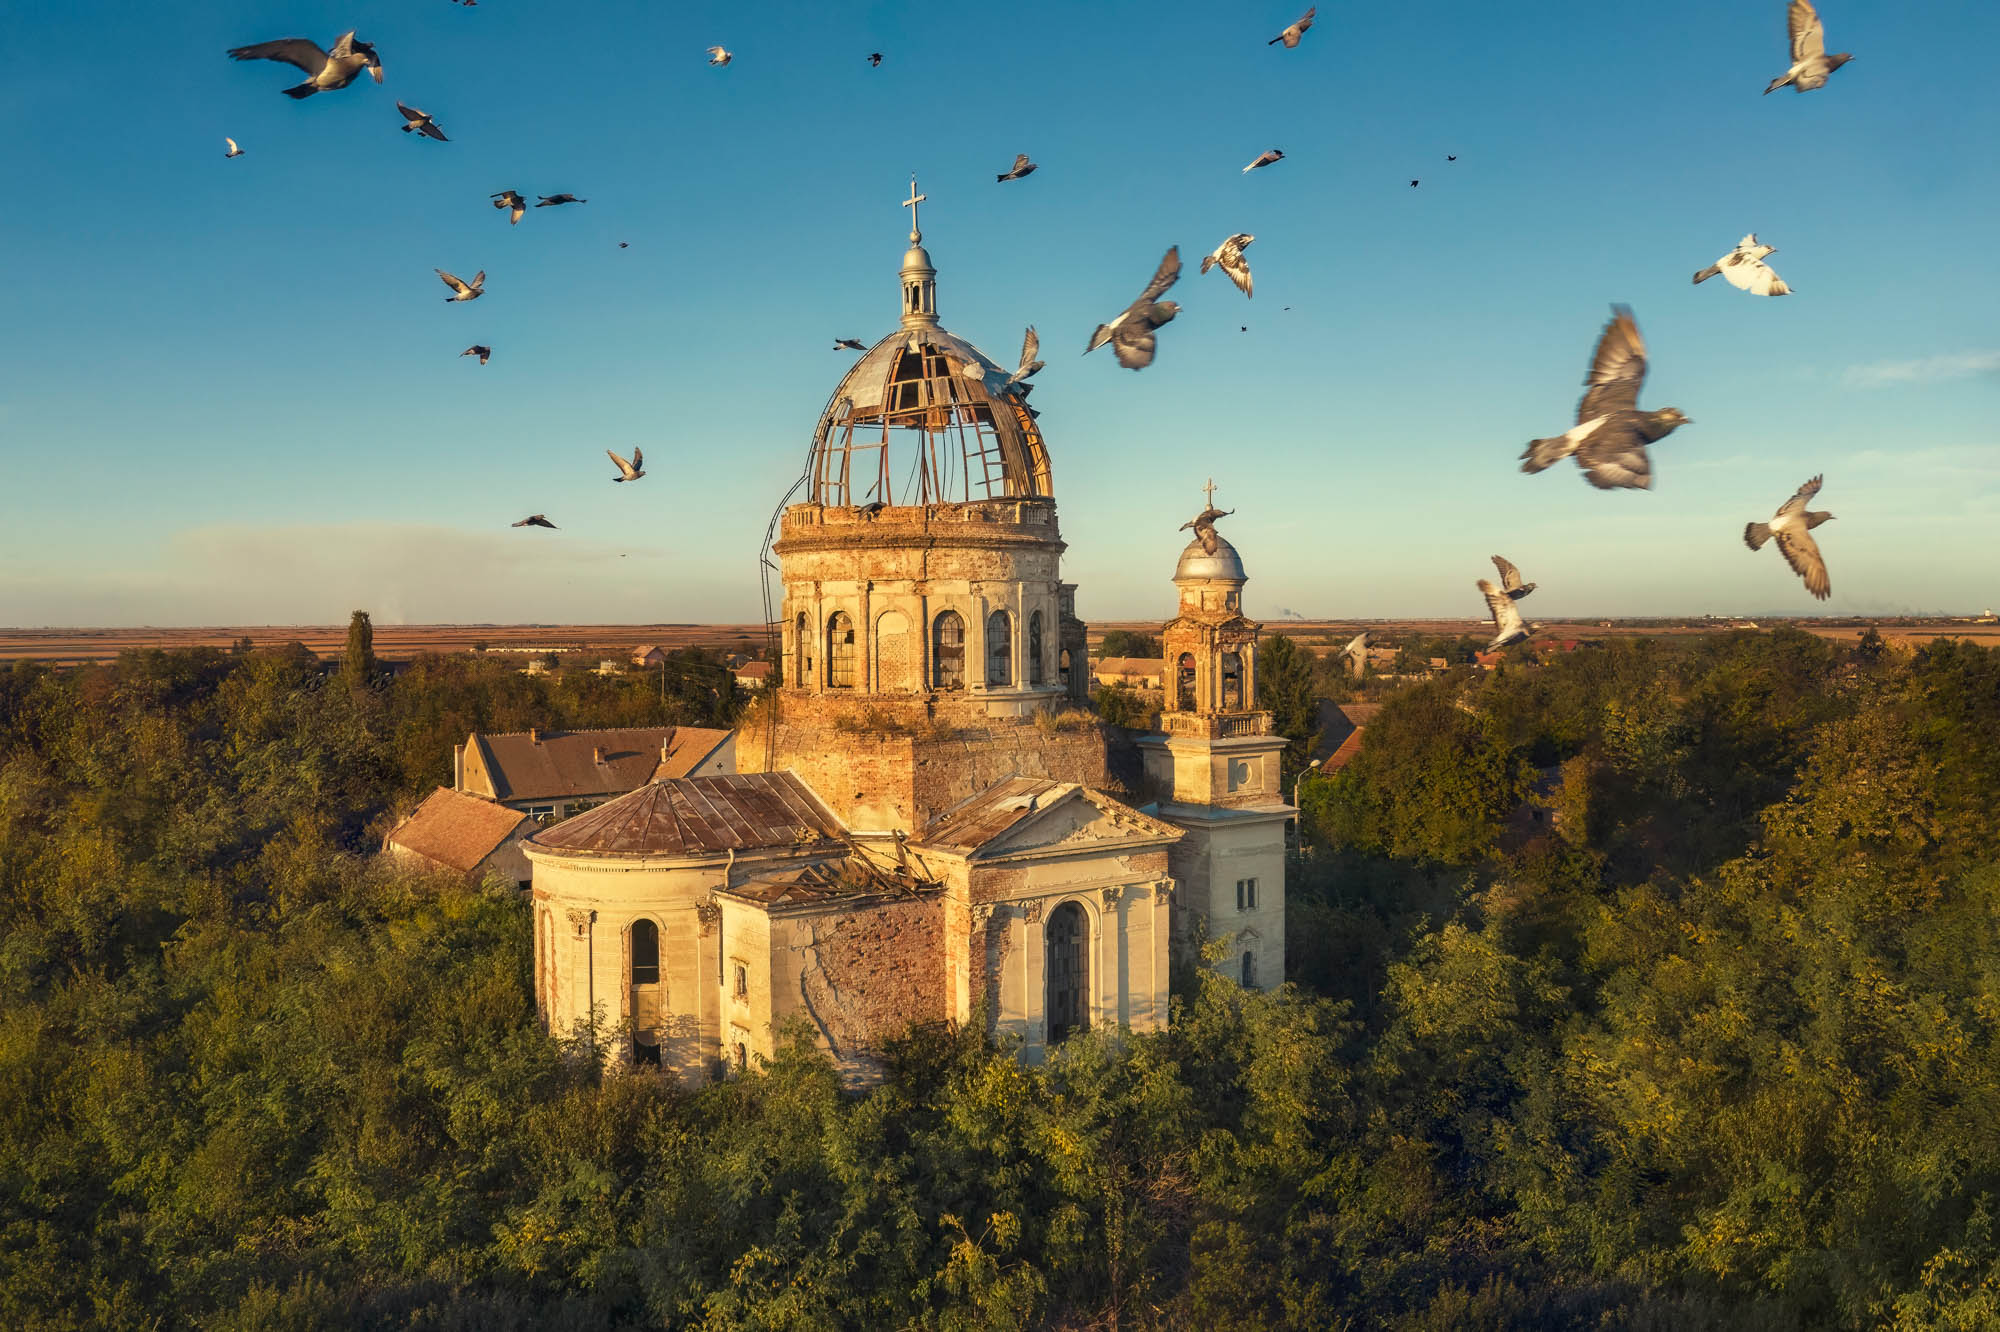 Old Mausoleum in Romania, Lost Place, Abandoned, Birds